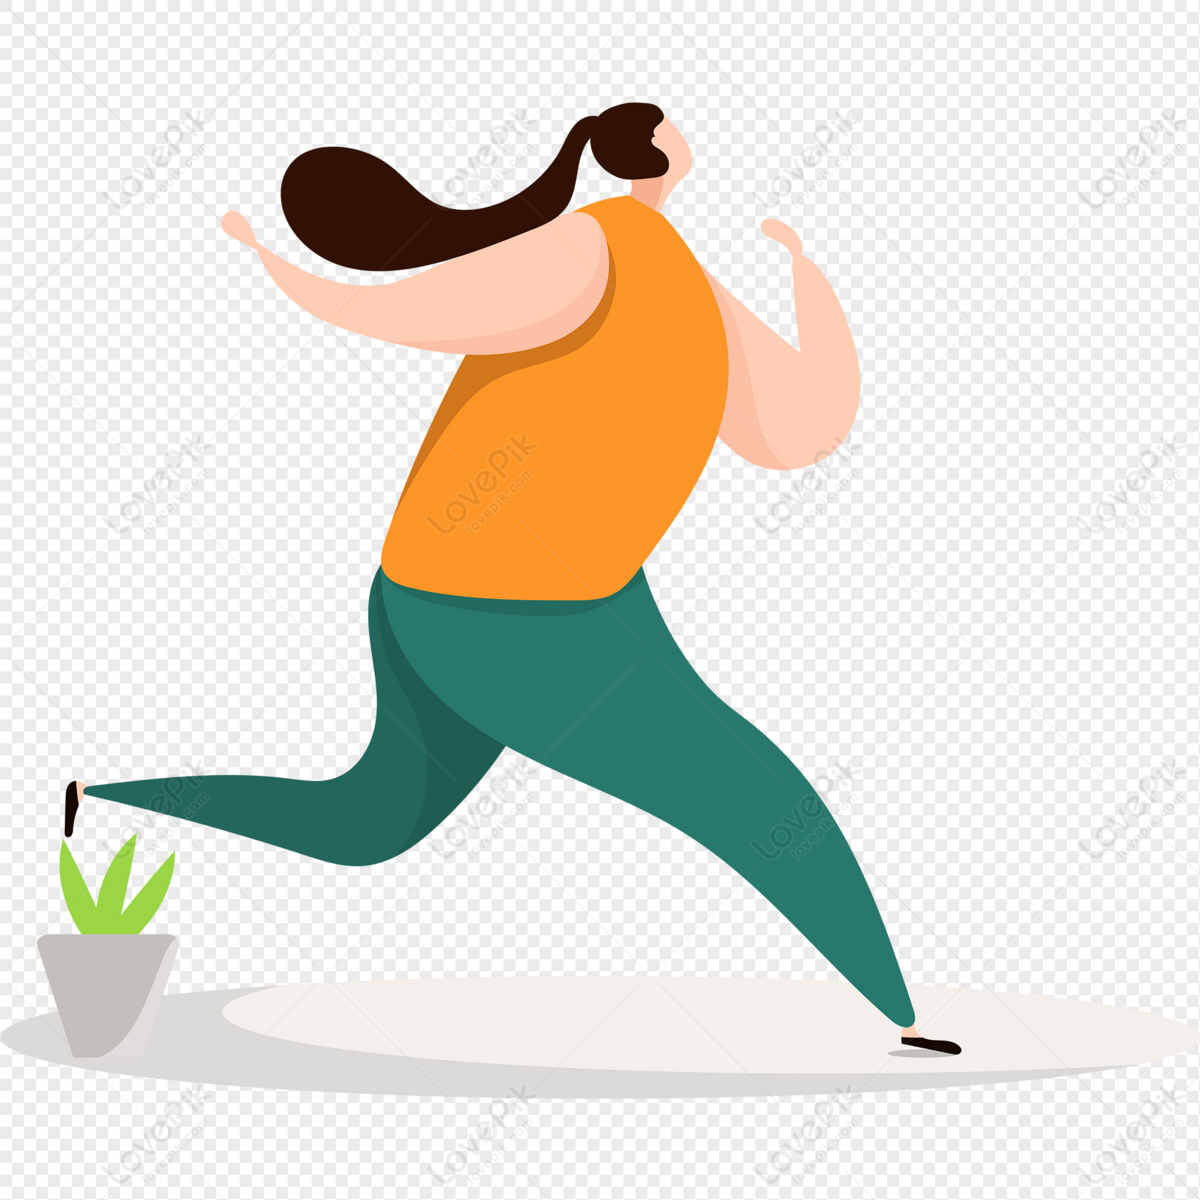 Weight Loss White Transparent, Weight Loss Exercise Cartoon Vector  Illustration Weight Loss Equipment Fitness Running, Lose Weight, Motion,  Cartoon PNG Image For Free Download